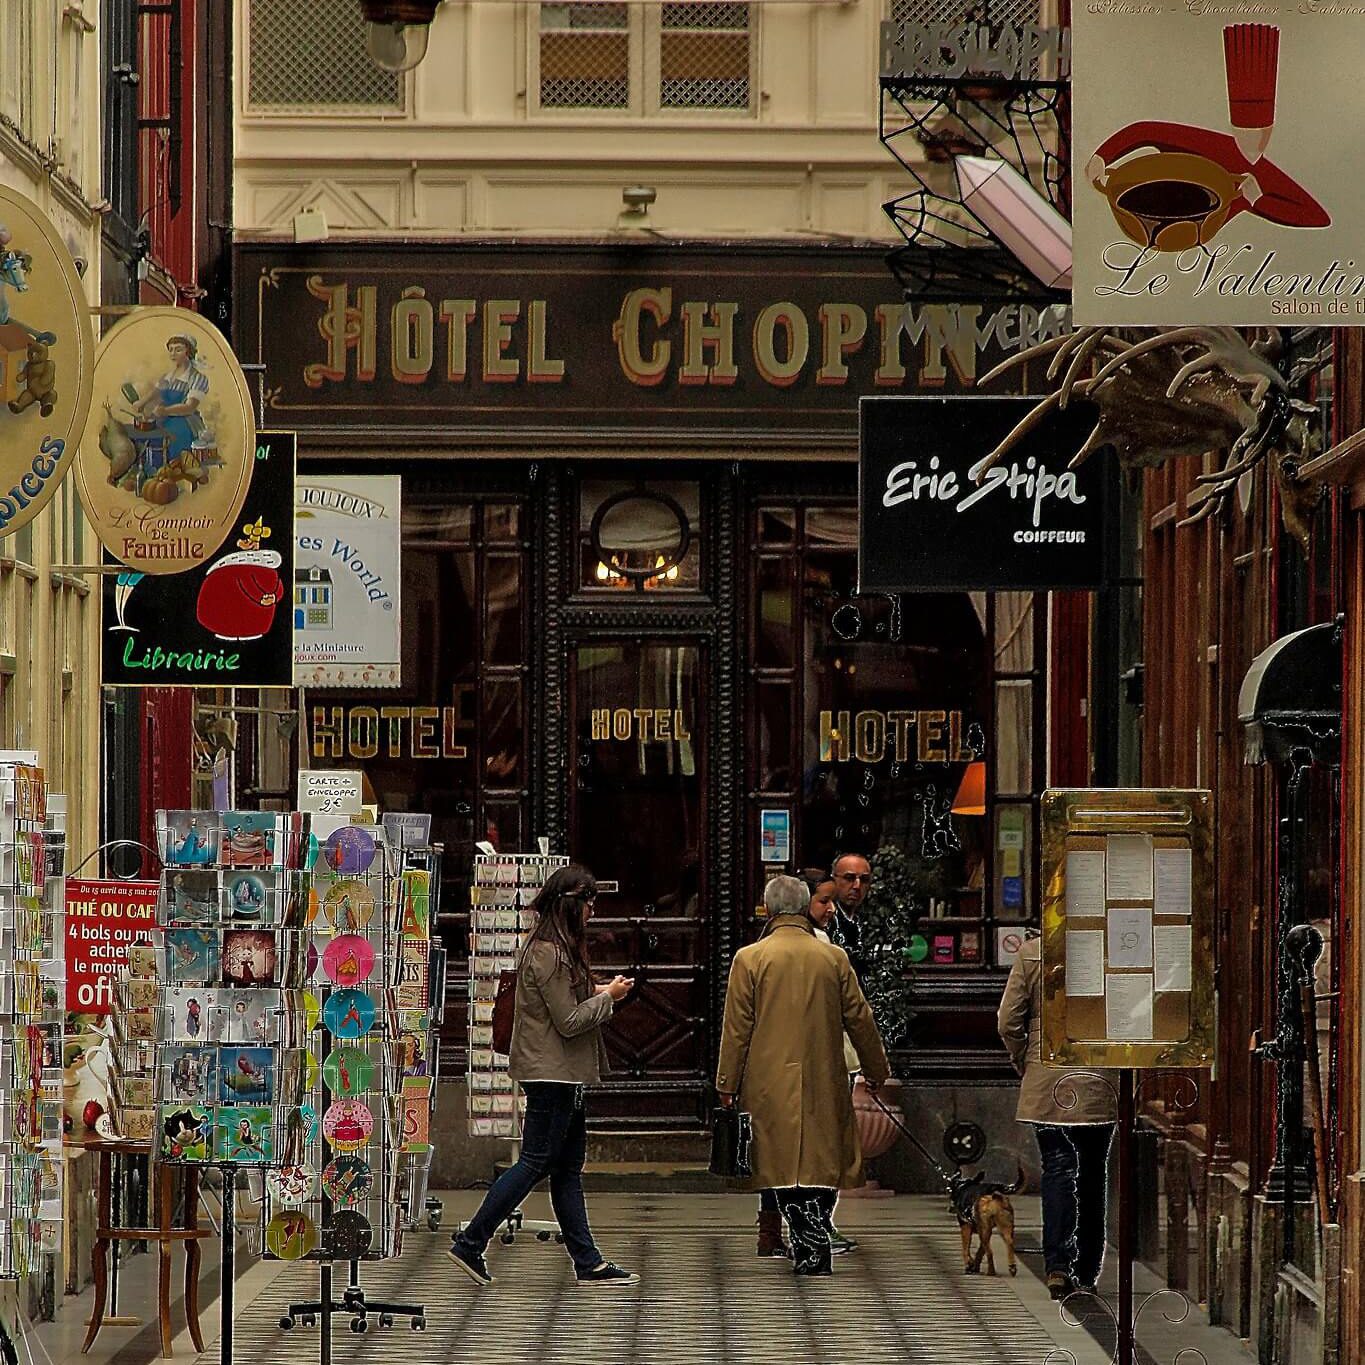 famous historic hotels paris Hotel Chopin by PATRICK BLEHAUT on Flickr edited